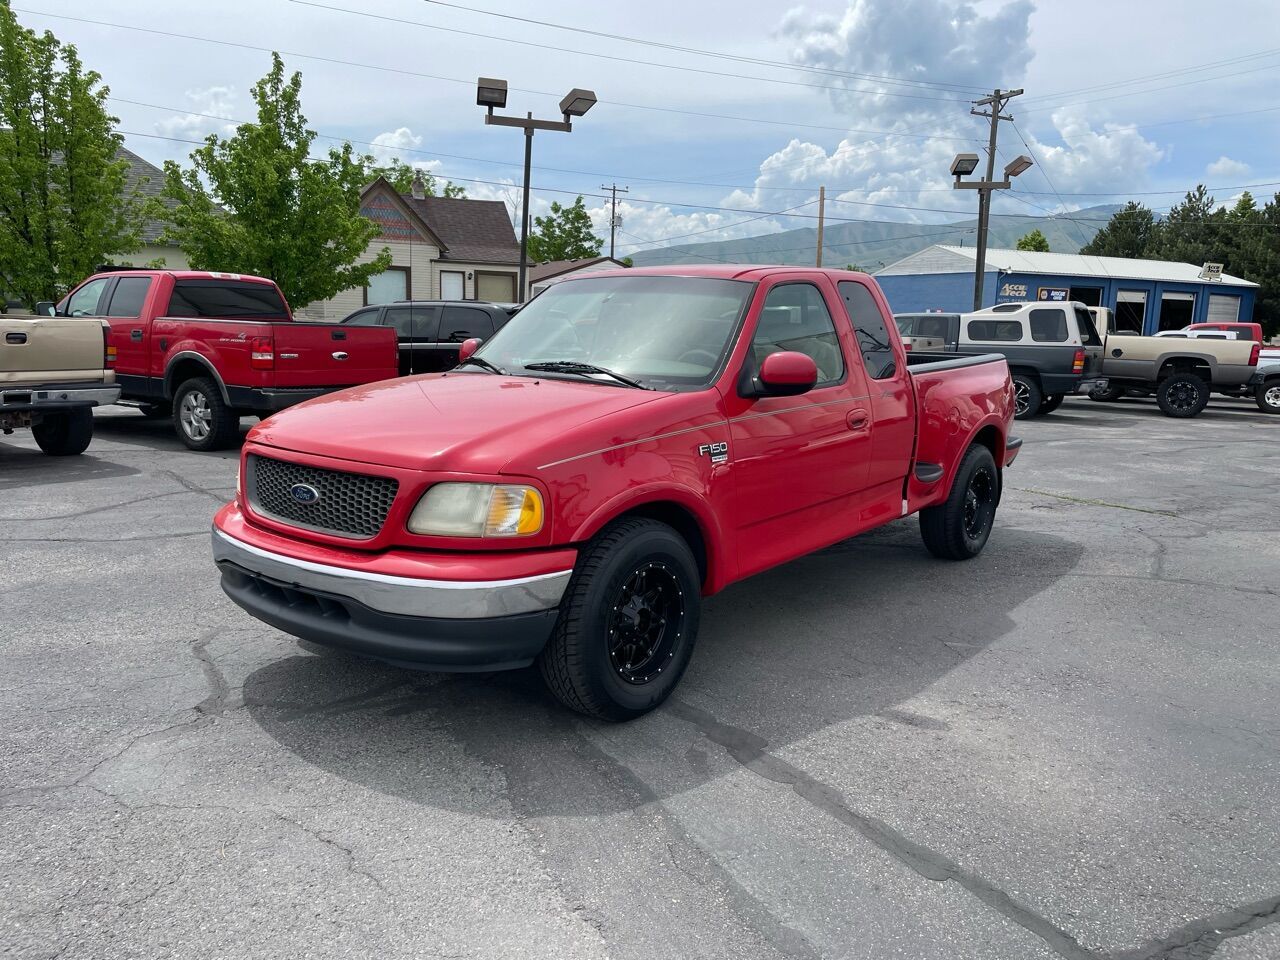 2001 - Ford - F-150 - $3,995